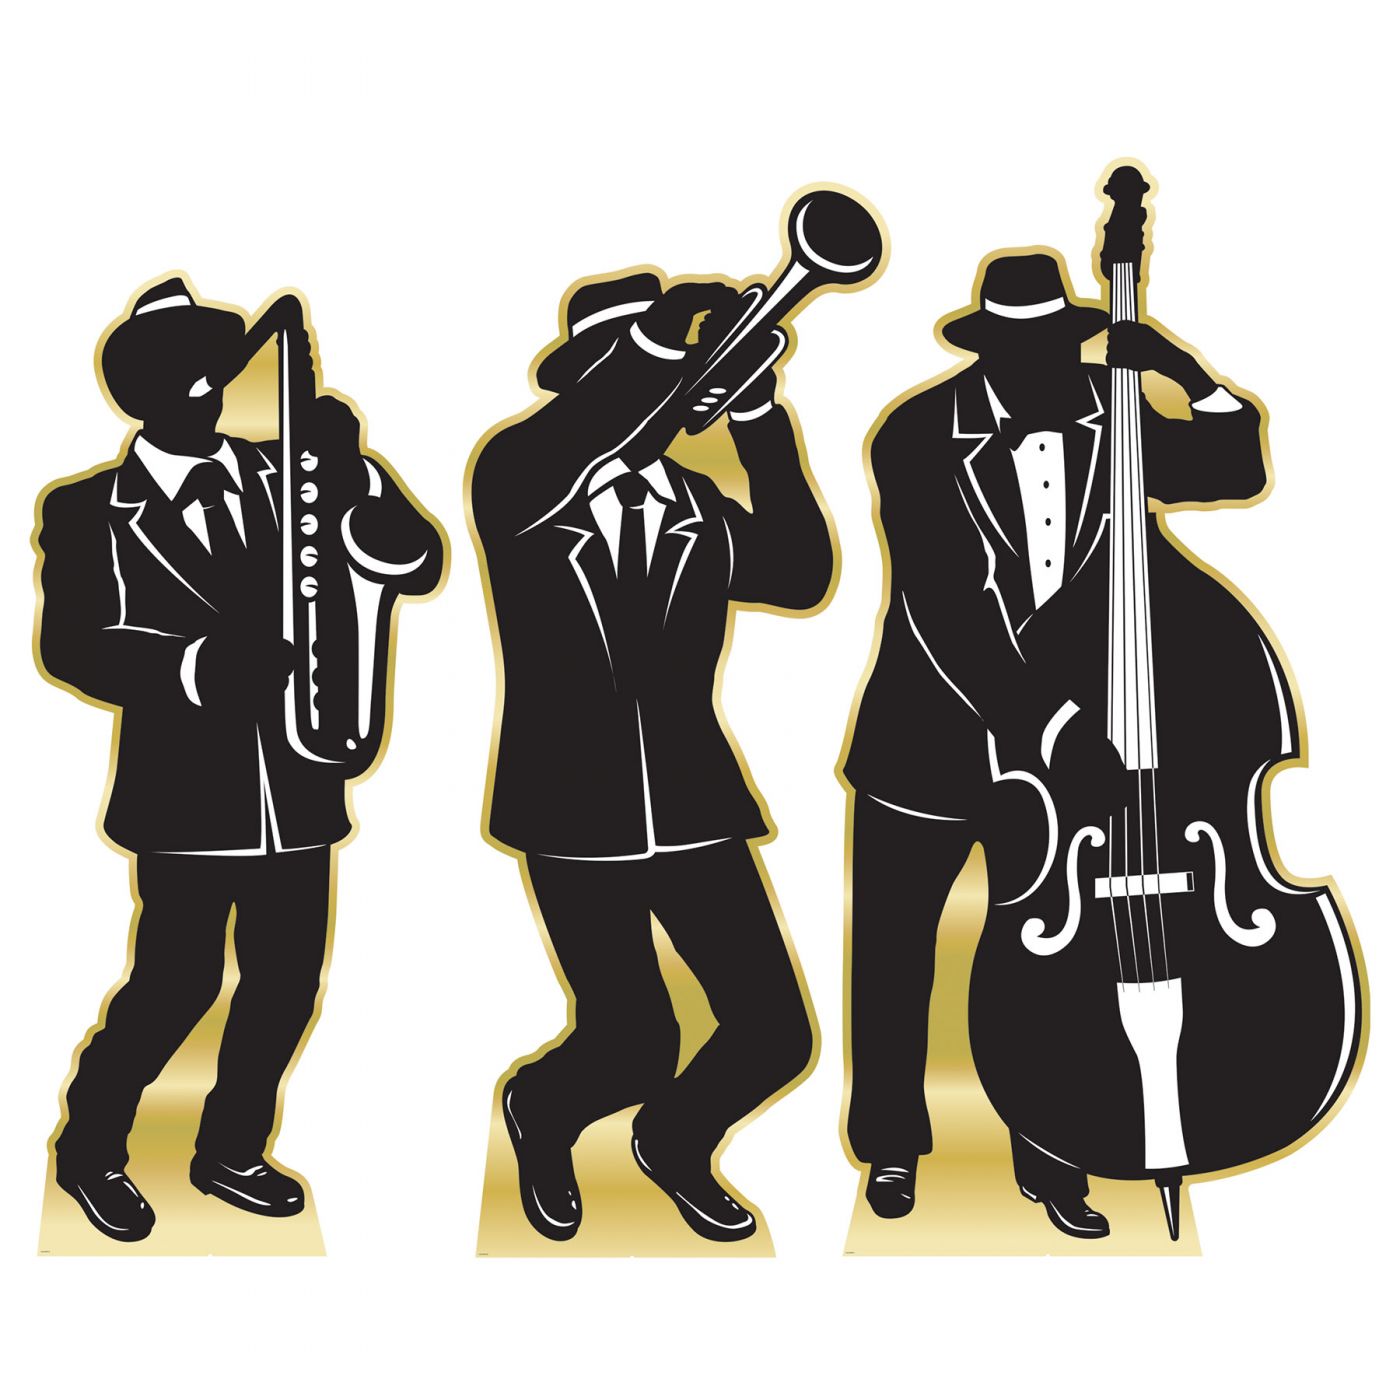 Great 20's Jazz Band Silhouette Stand-Ups (1) image